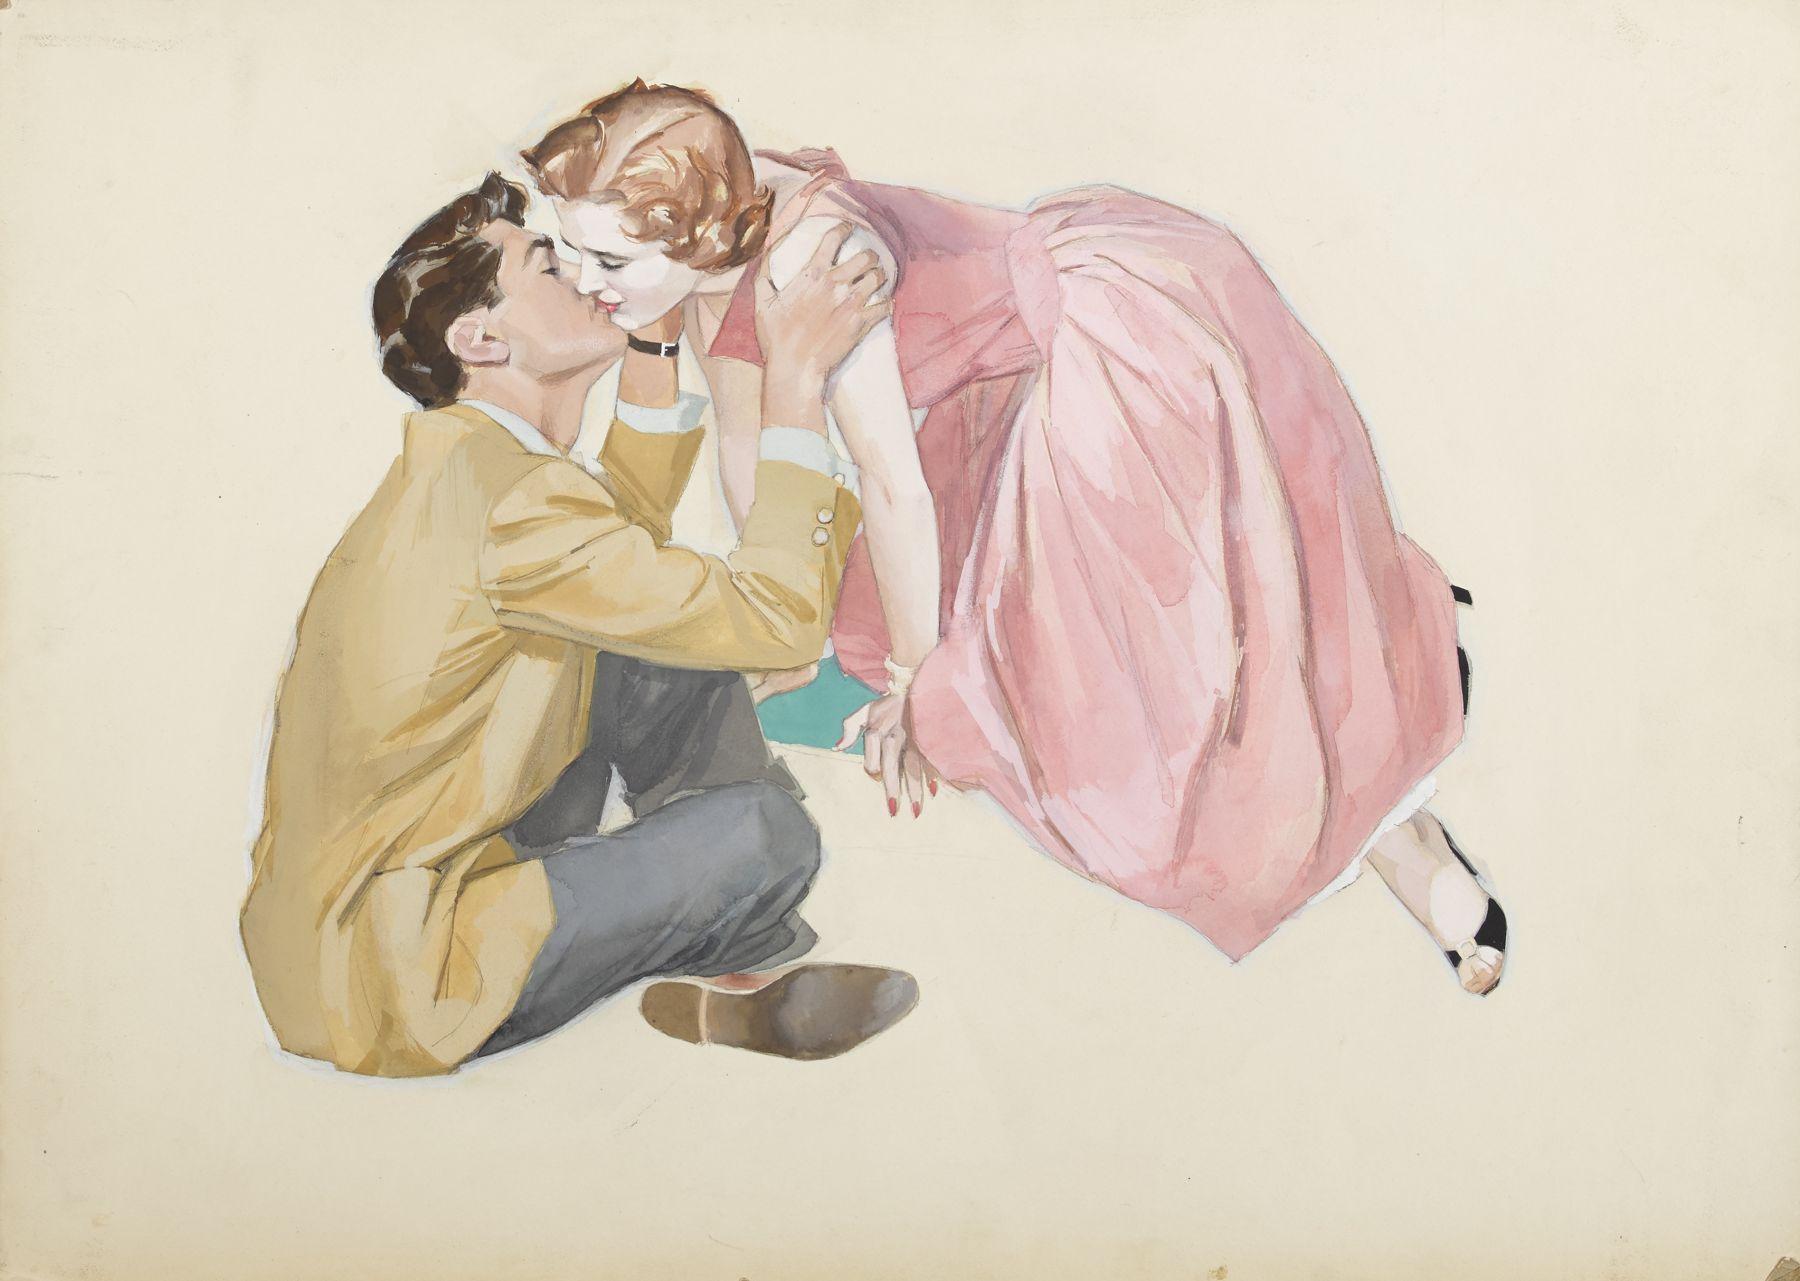 John Lagatta Figurative Art - A Woman in a Pink Dress Leaning Over and Kissing Seated Man